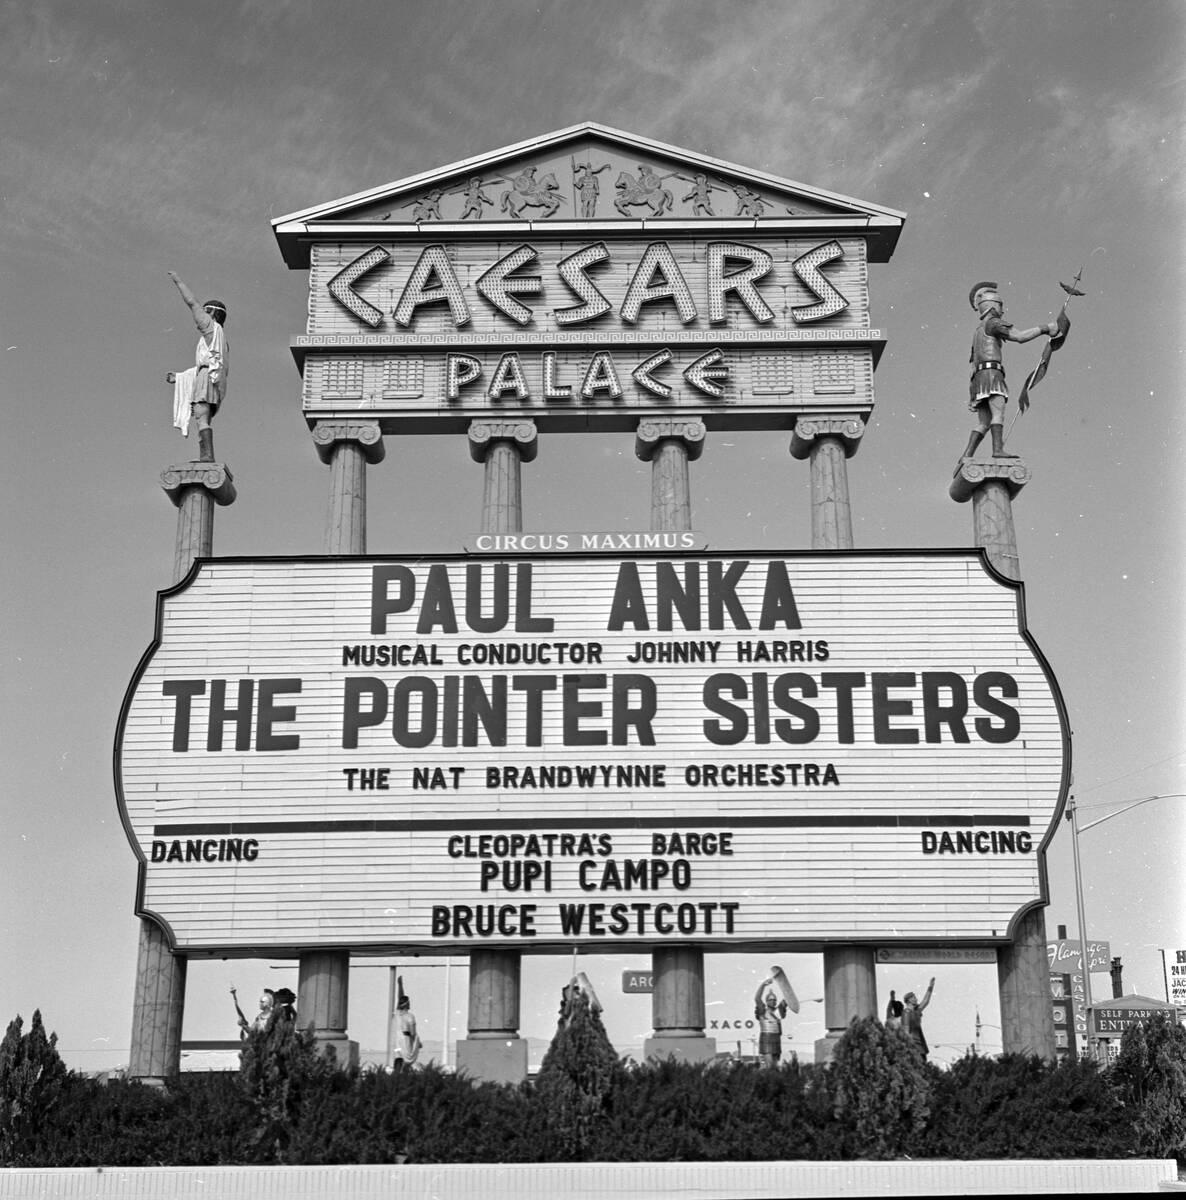 The Caesars Palace marquee advertising Paul Anka, Musical Conductor Johnny Harris, The Pointer ...